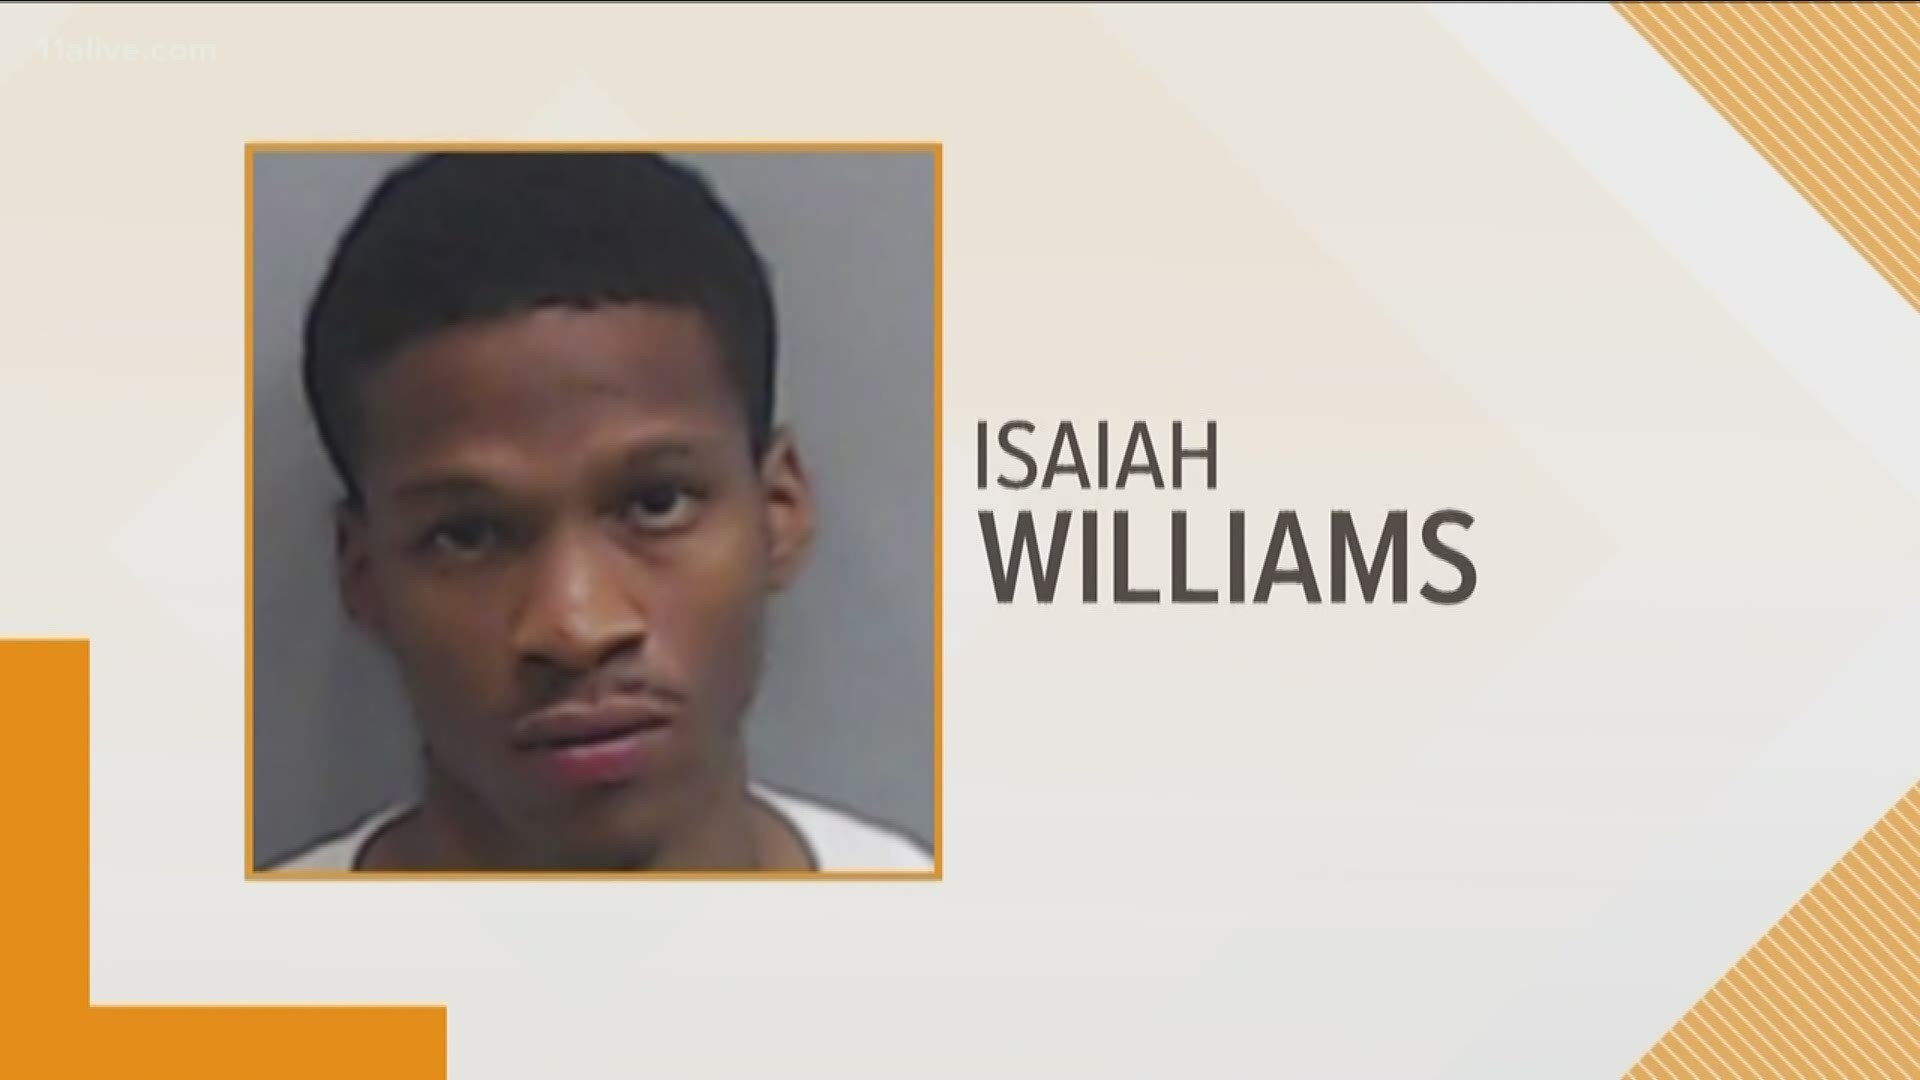 Williams is  being held in jail right now without bond. Four students were injured in the shooting that took place outside the Atlanta University Center Library.